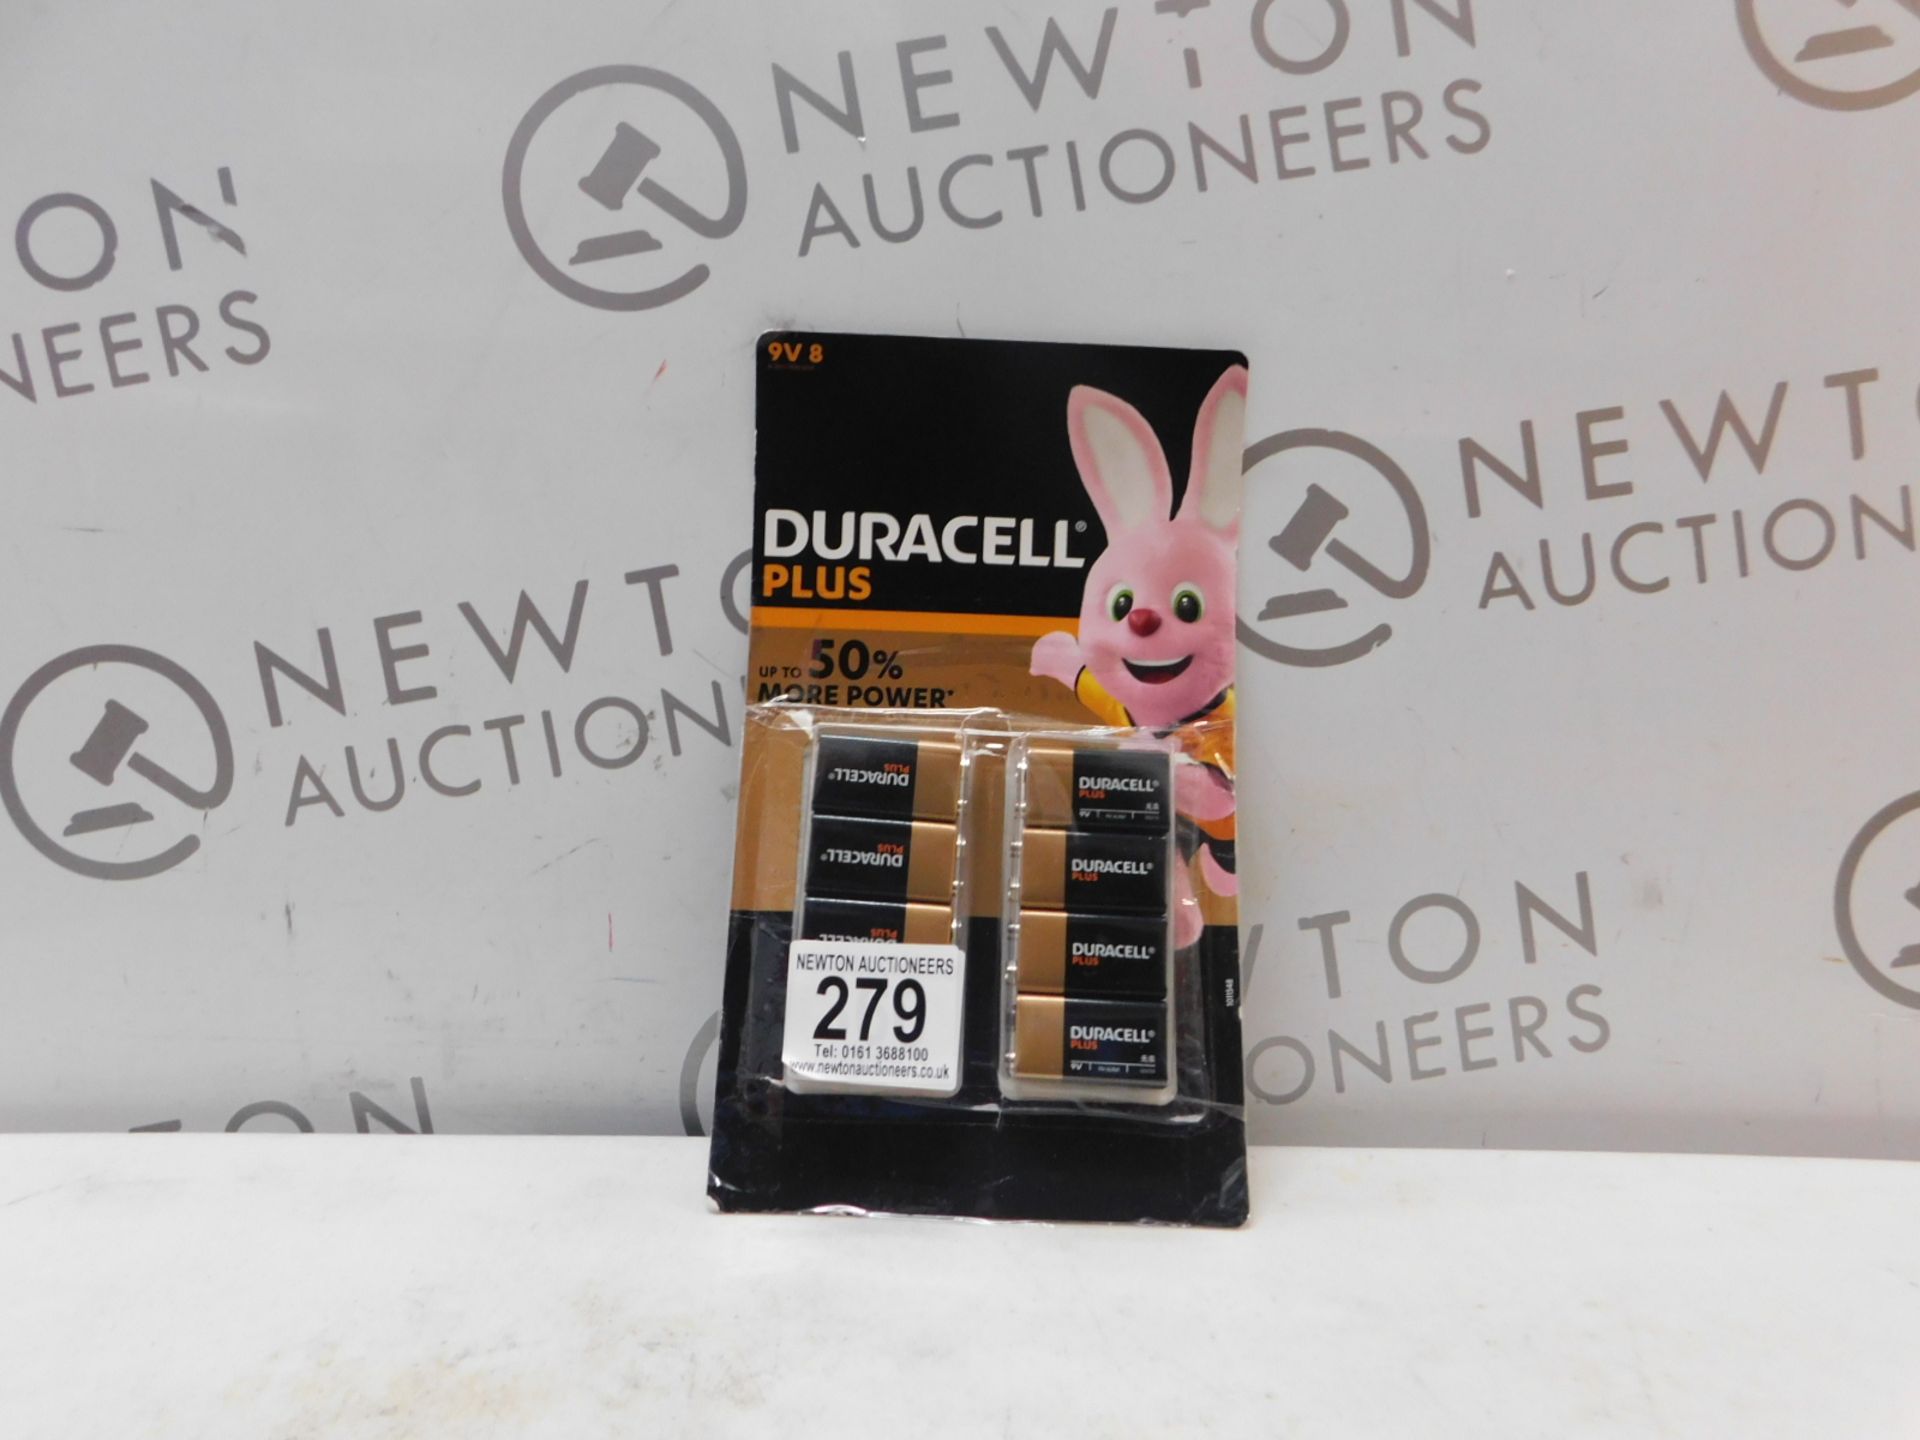 1 PACK OF 8 DURACELL PLUS 9V BATTERIES RRP Â£19.99